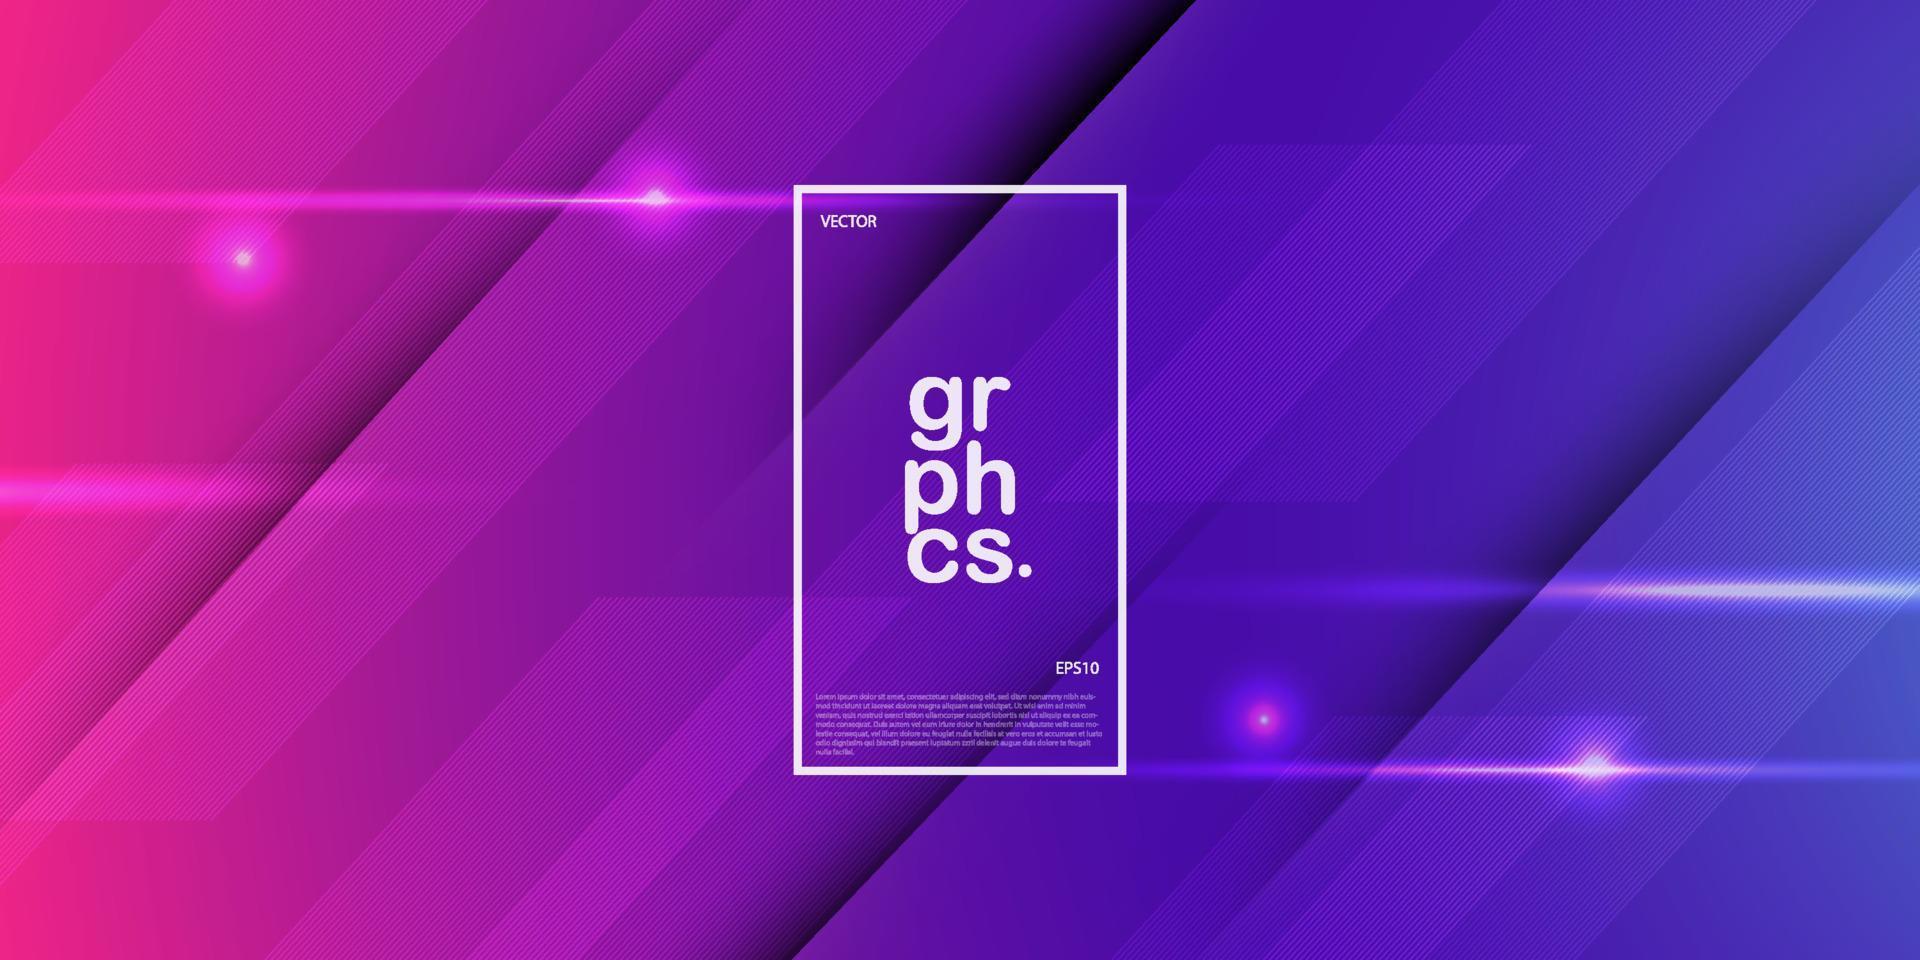 Modern premium geometric dark purple violet background design template. shadow and lights compotition .Eps10 vector